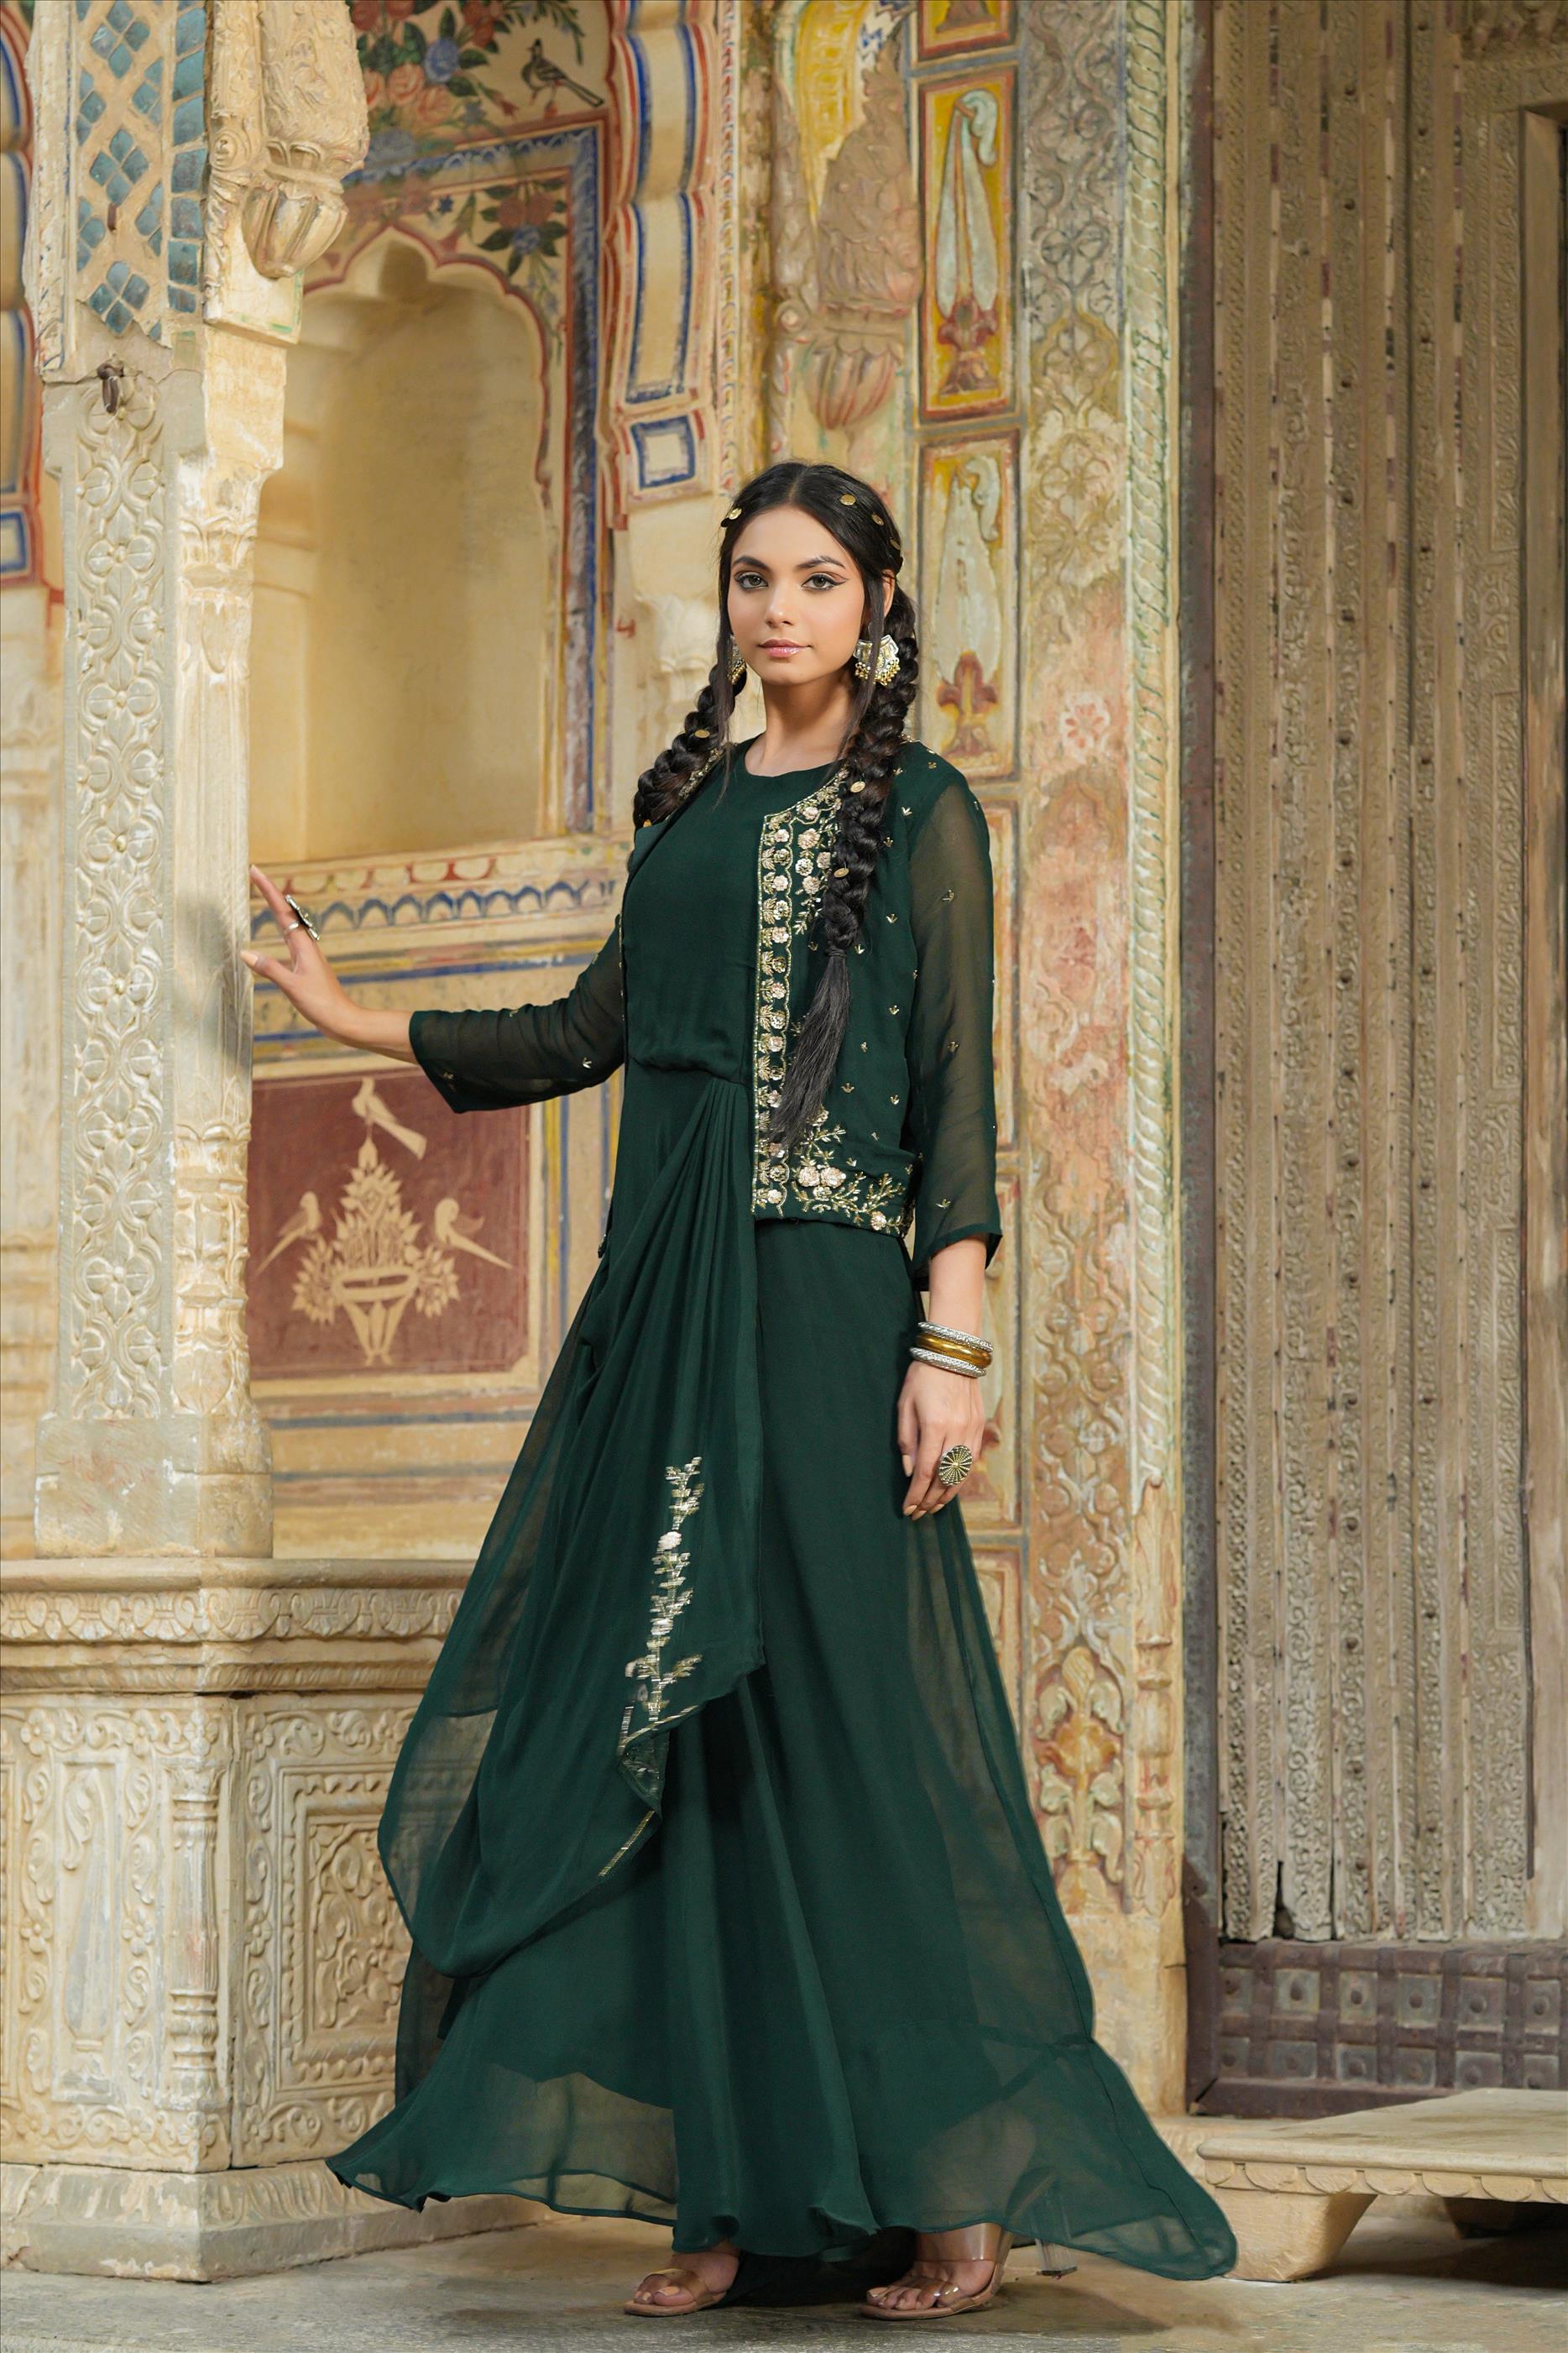 Crepe Silk Fusion Wear in Deep Green Color with Jacket